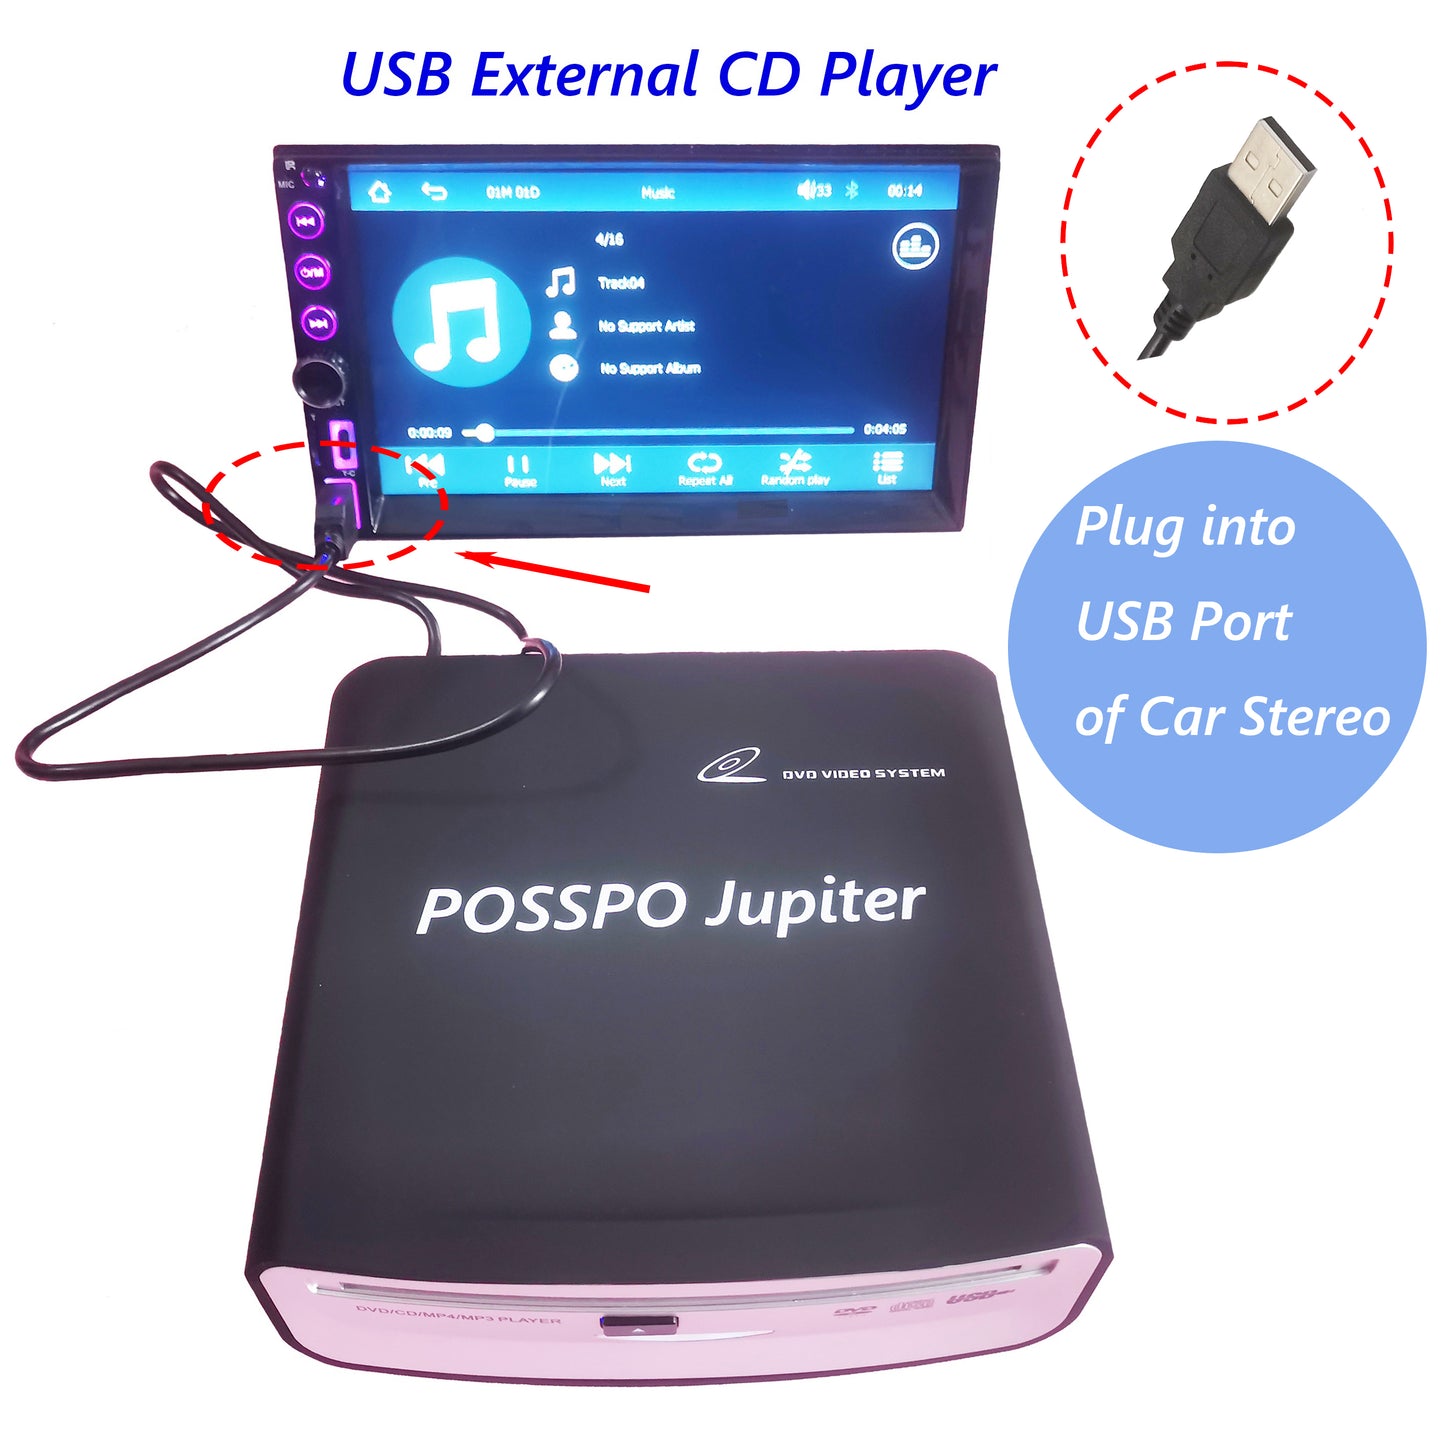 POSSPO Jupiter CD DVD Player for Jeep Cherokee Latitude, Portable External CD Player for Car with USB Port, Plug & Play –Upgraded with Extra USB Extension Cable